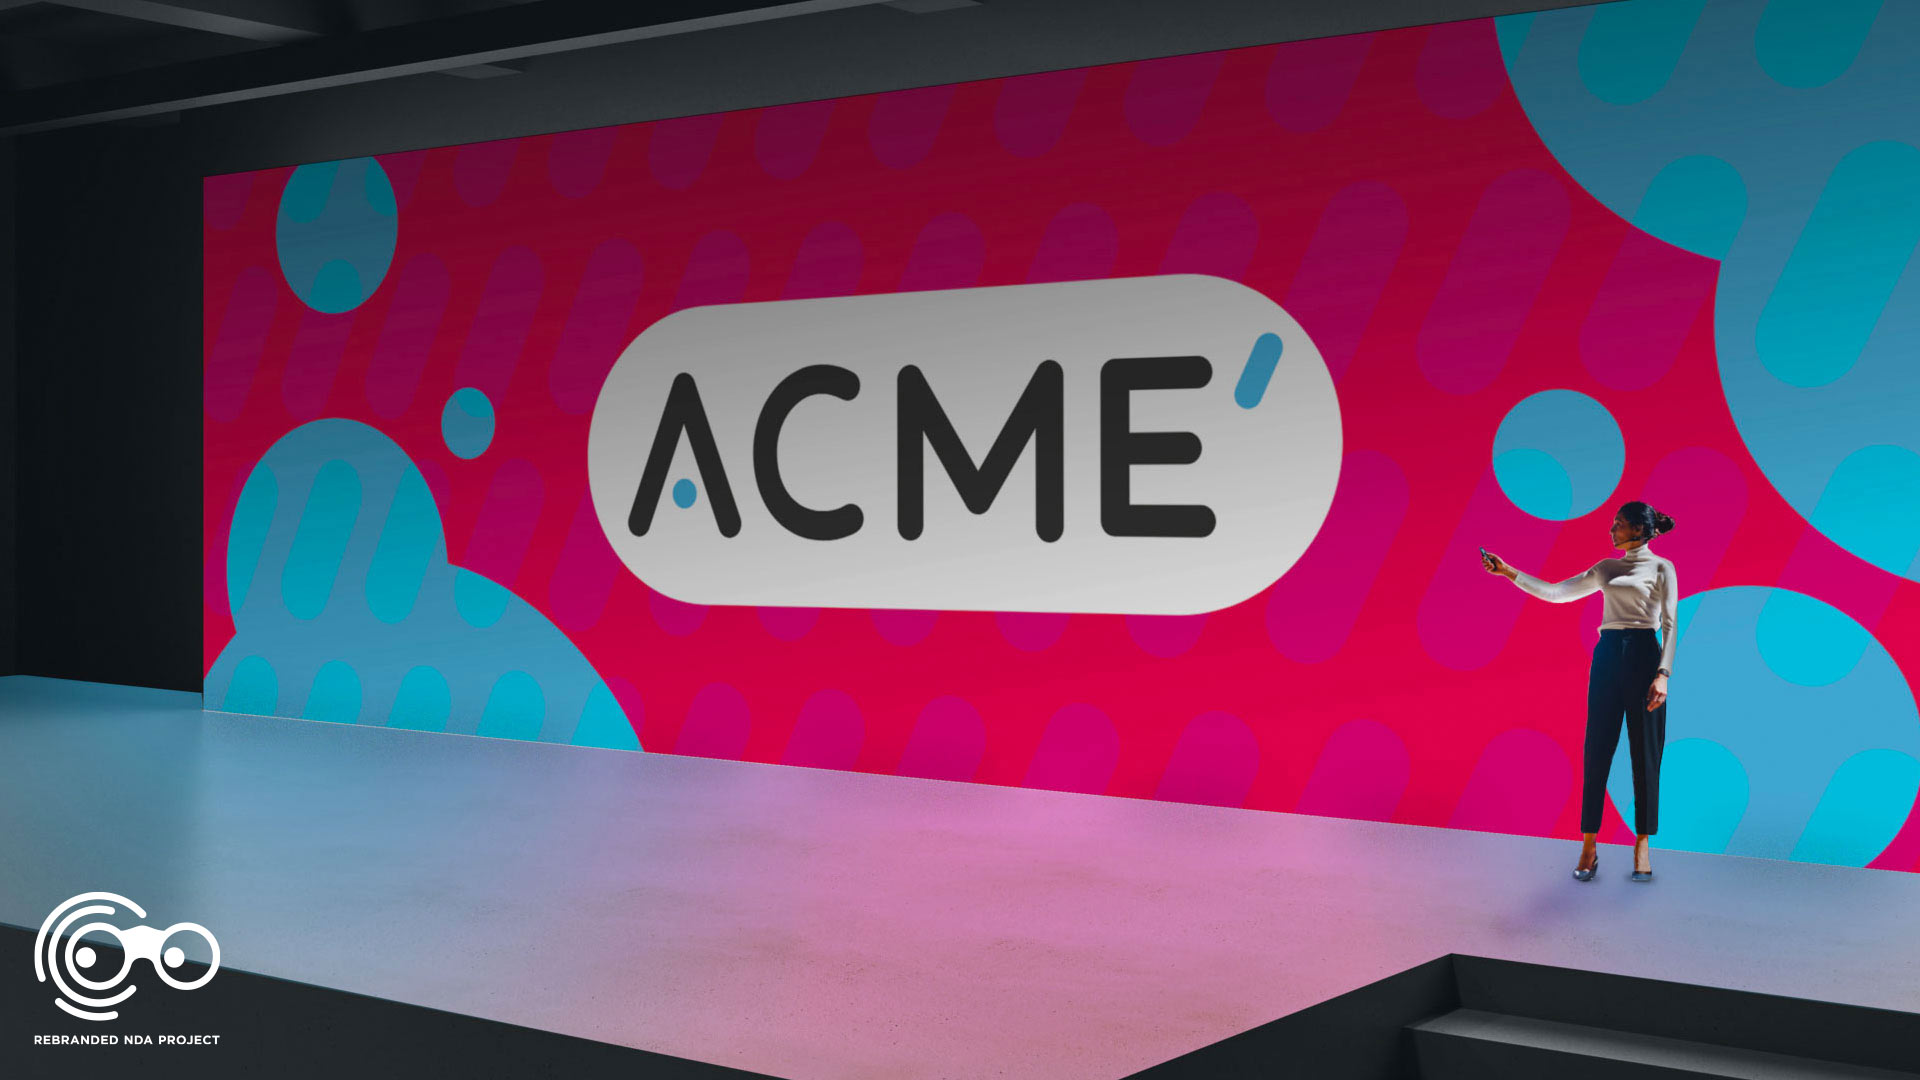 ACME Prime logo displayed on a large conference presentation screen with a business woman talking infront